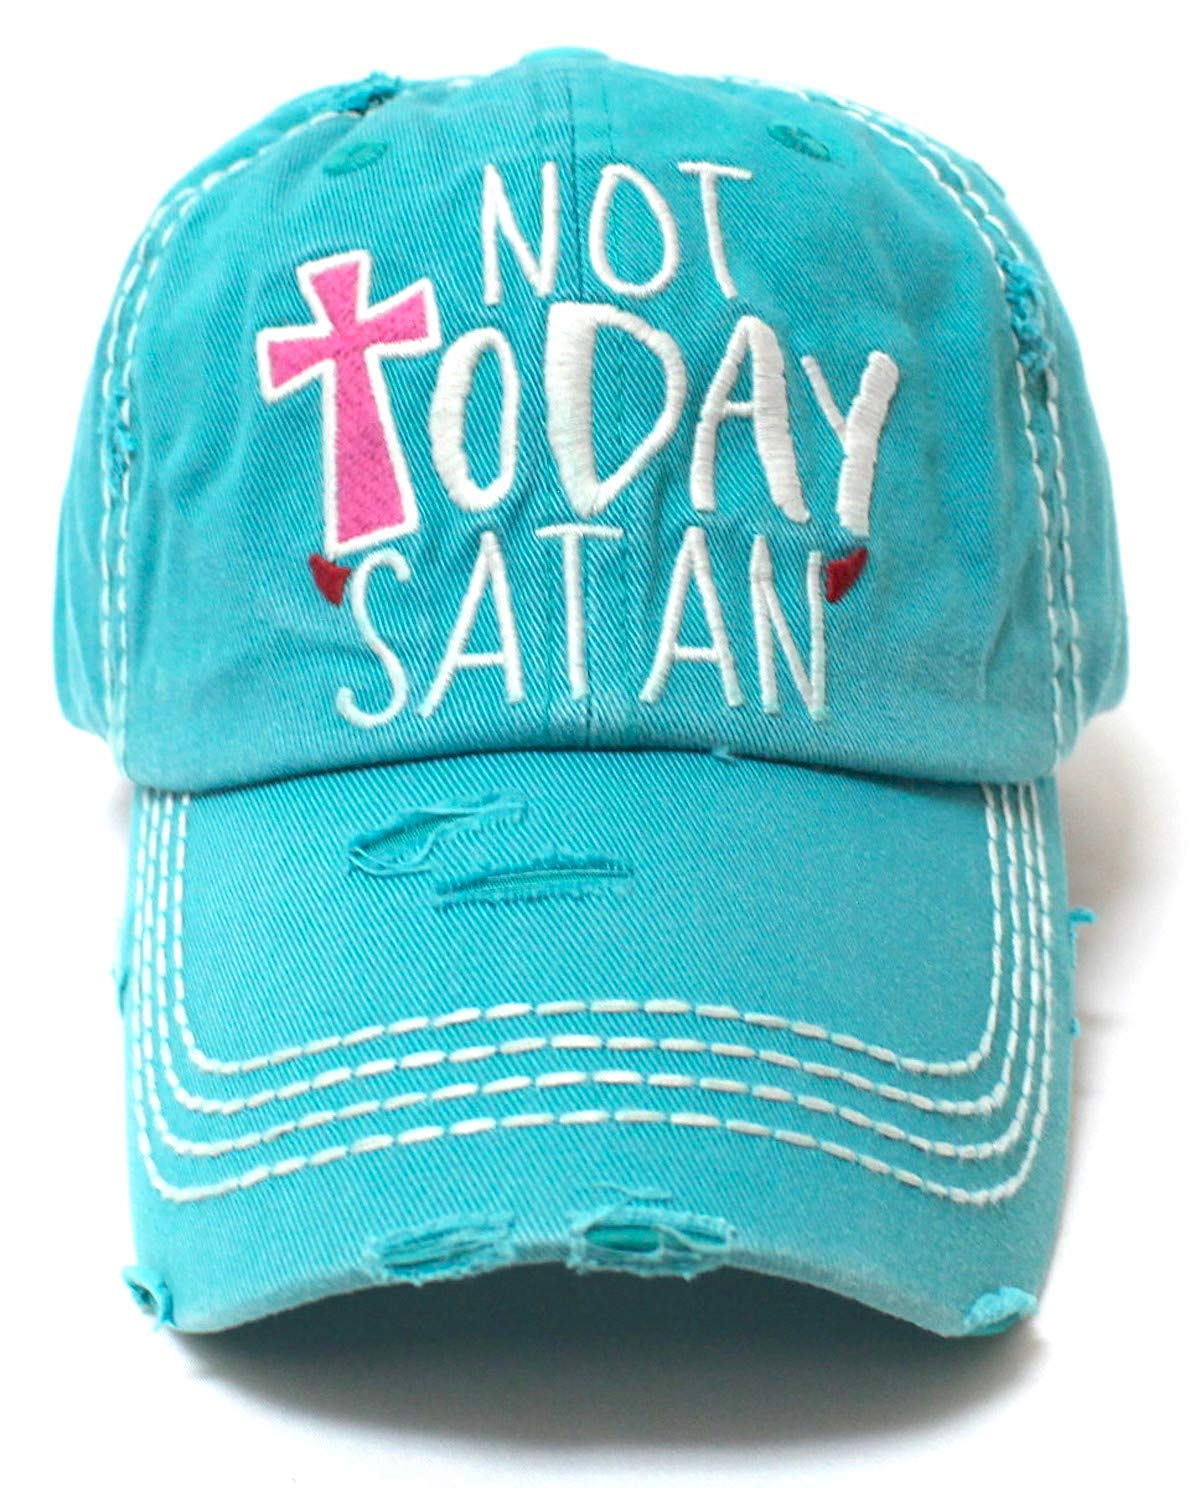 Not Today Satan Humor Graphic Adjustable Ballcap, Turquoise - Caps 'N Vintage 